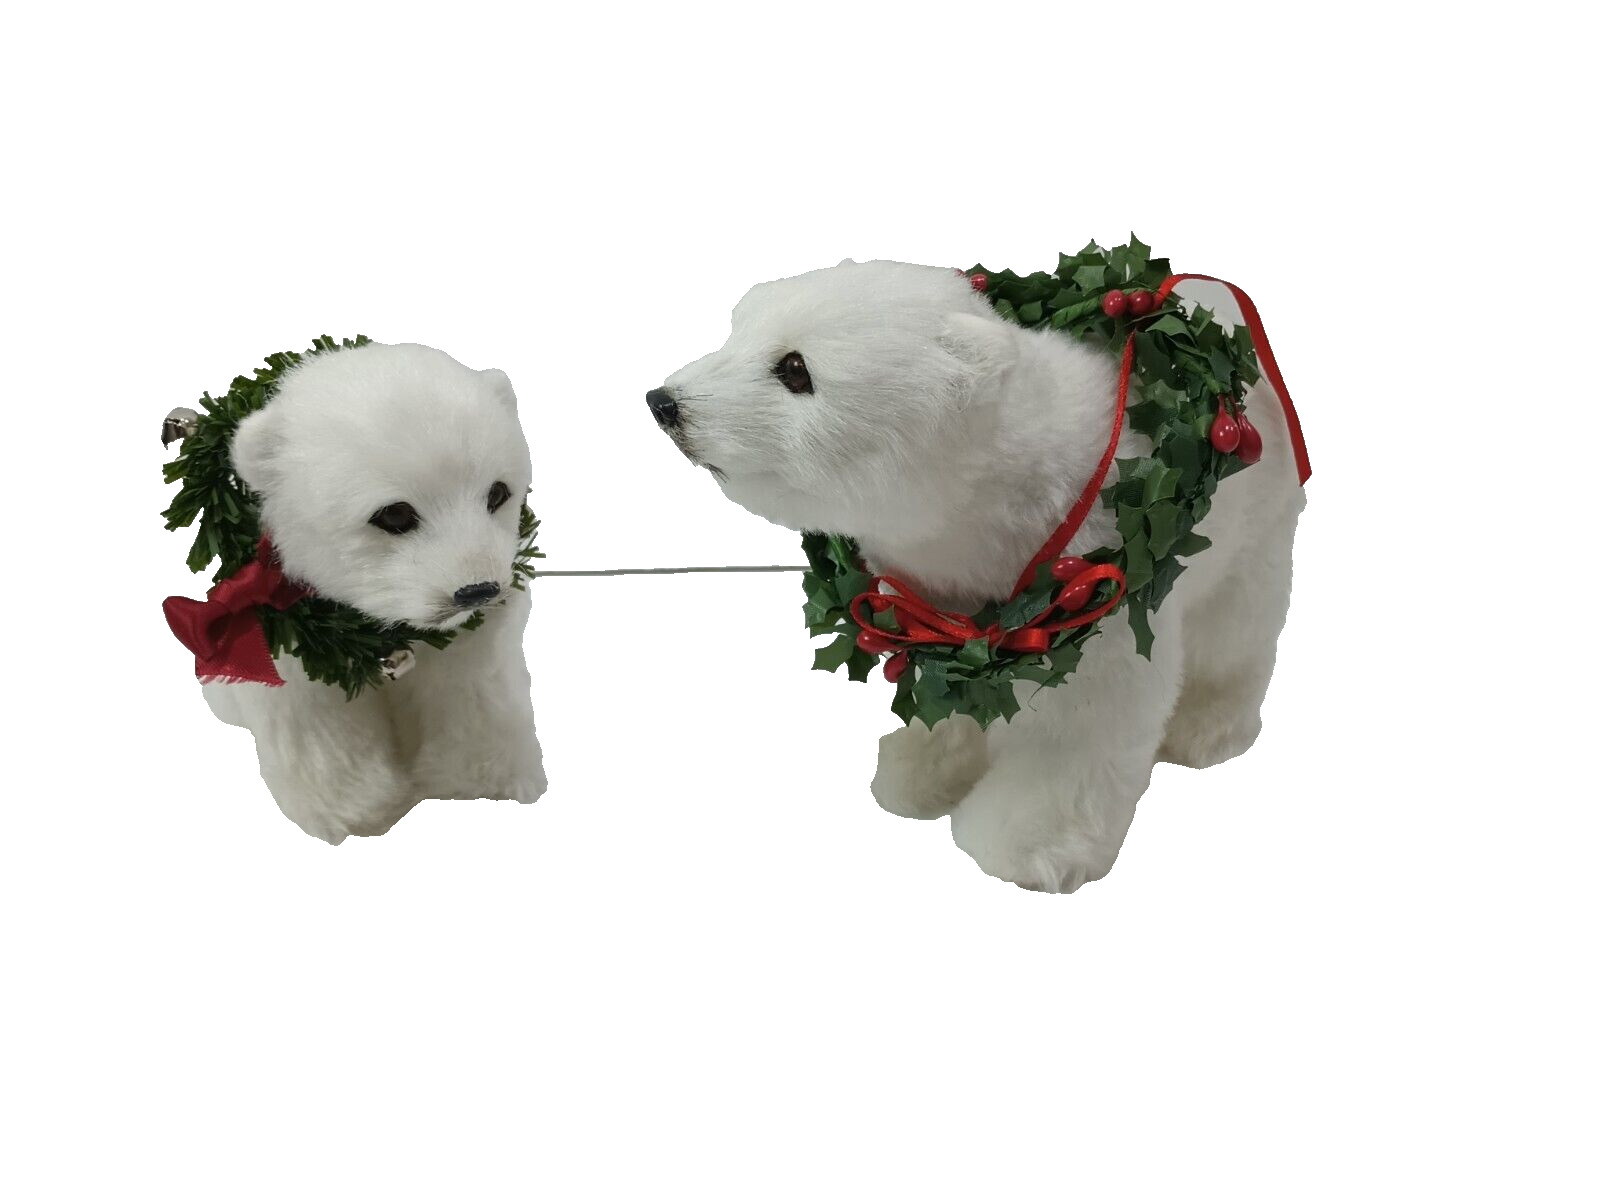 Byers Choice White Polar Bears - Lot of 2 with Christmas Holiday Wreath 2012/13